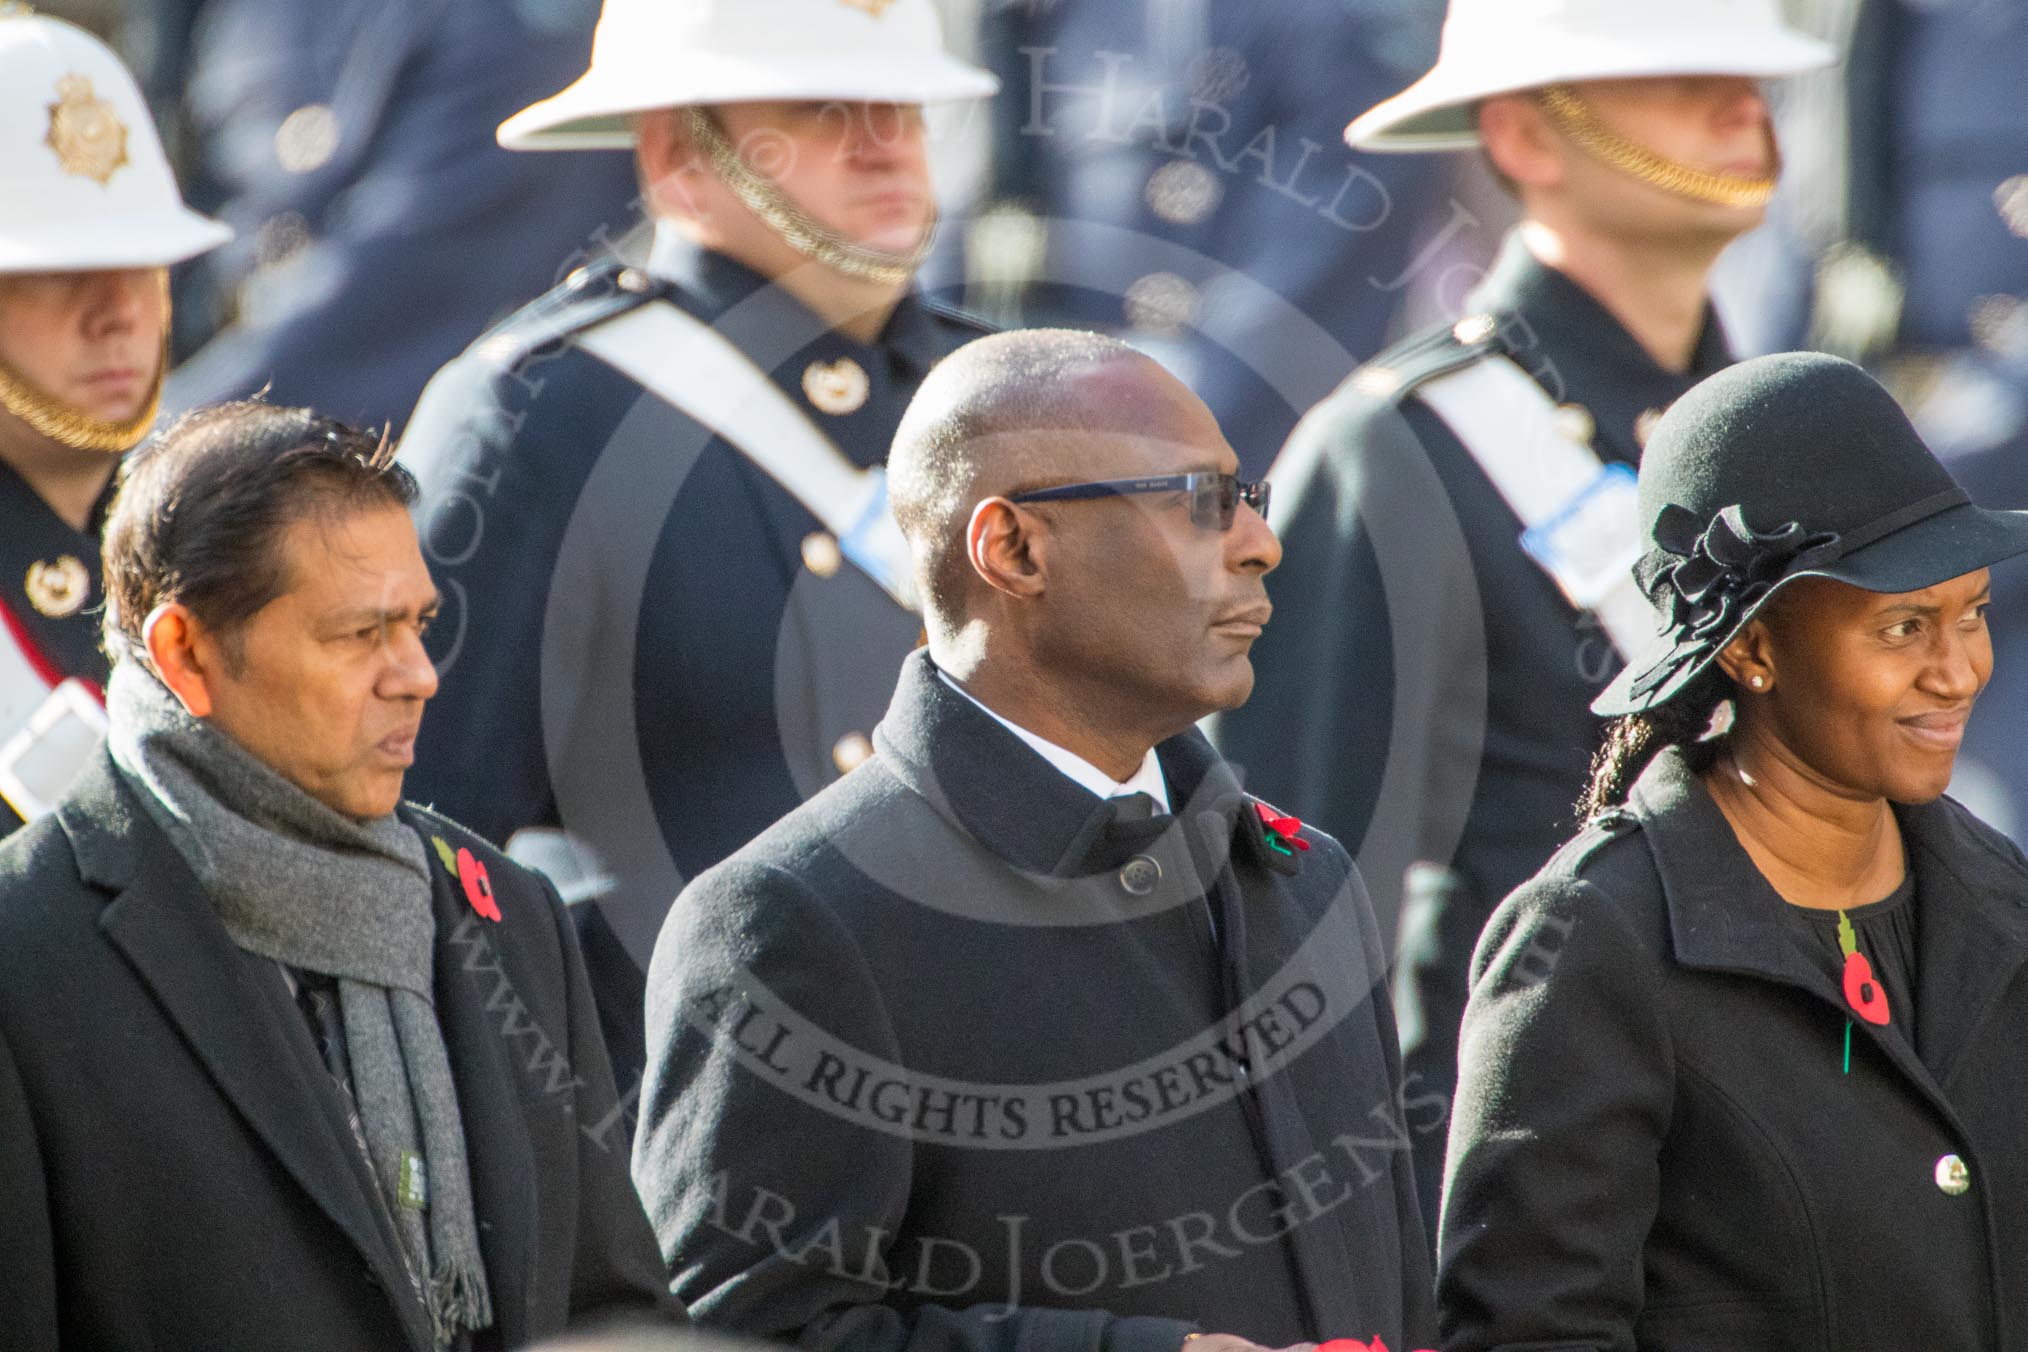 The High Commissioner of Mauritius, the  Deputy High Commissioner of Barbados, and the Acting High Commissioner of Lesotho during Remembrance Sunday Cenotaph Ceremony 2018 at Horse Guards Parade, Westminster, London, 11 November 2018, 11:13.